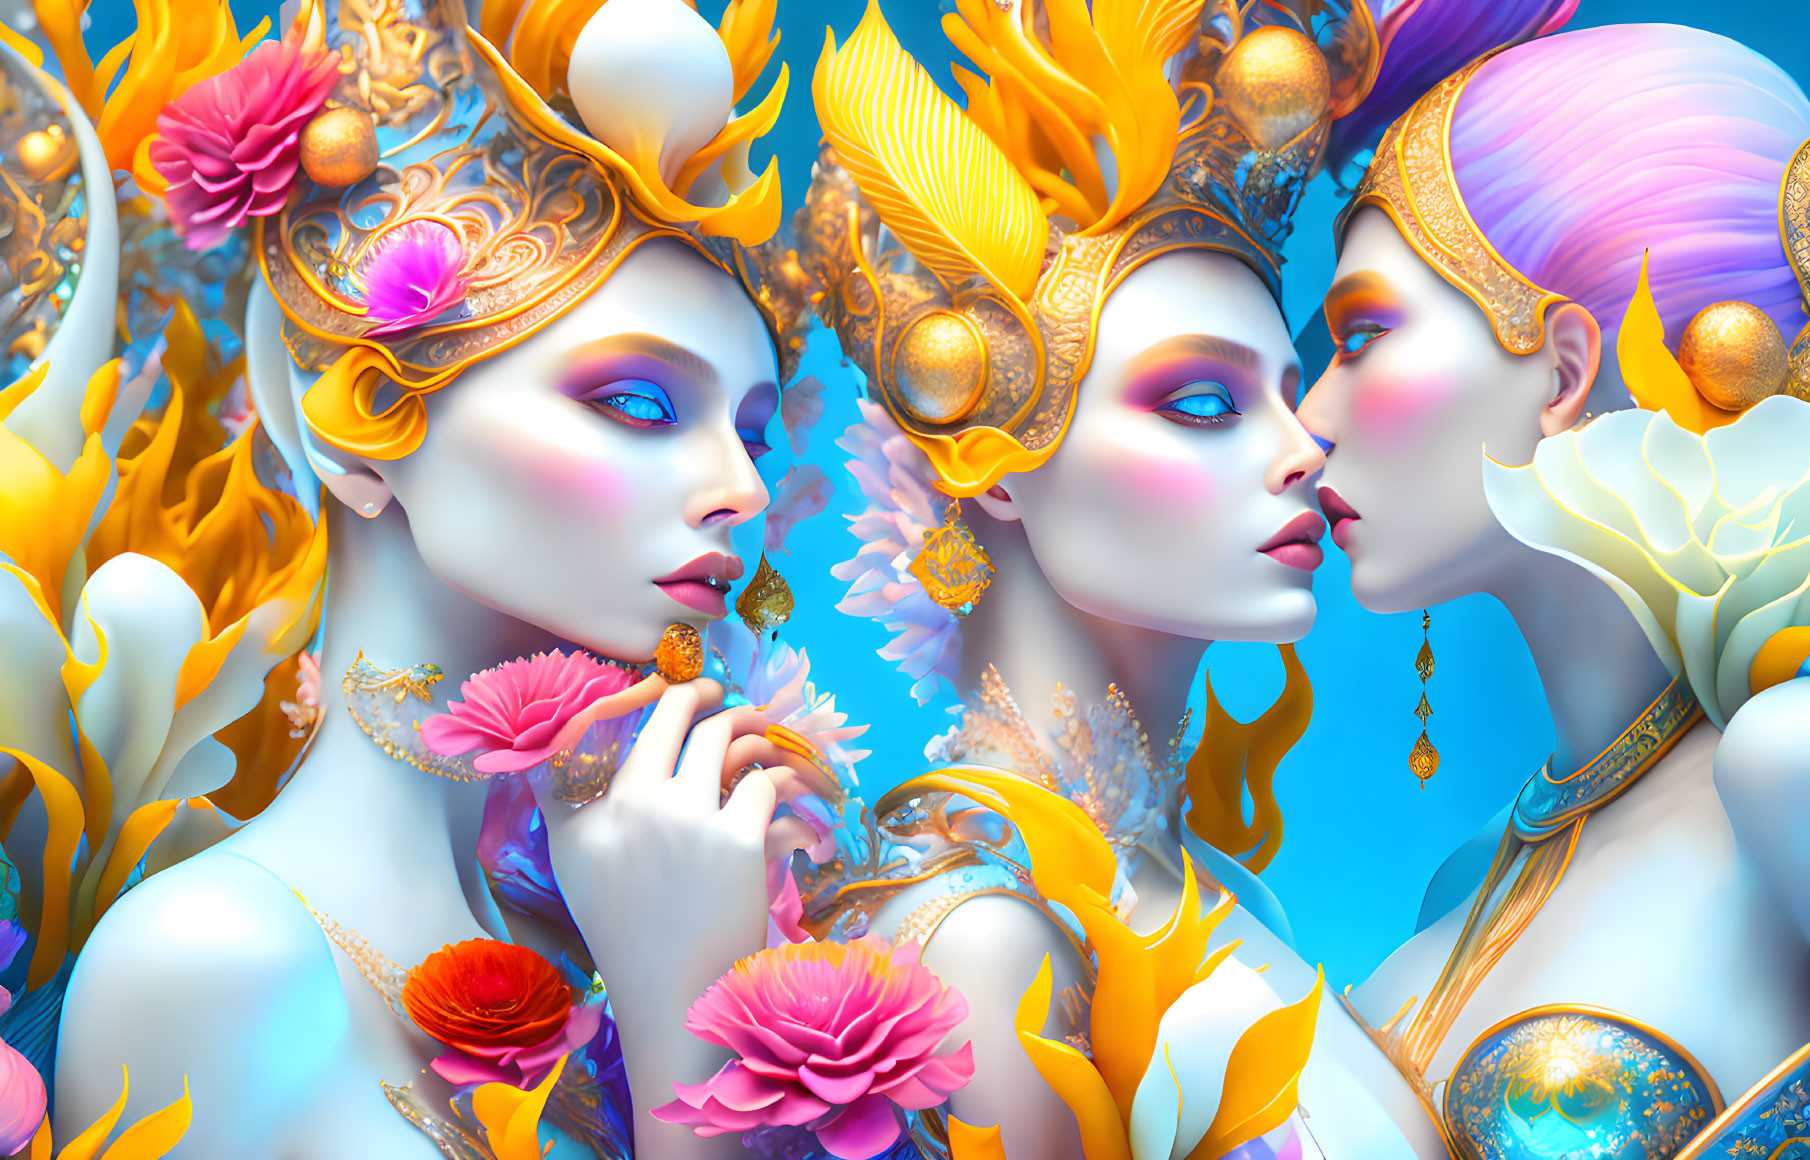 Colorful fantasy characters with golden headpieces and floral adornments on blue background